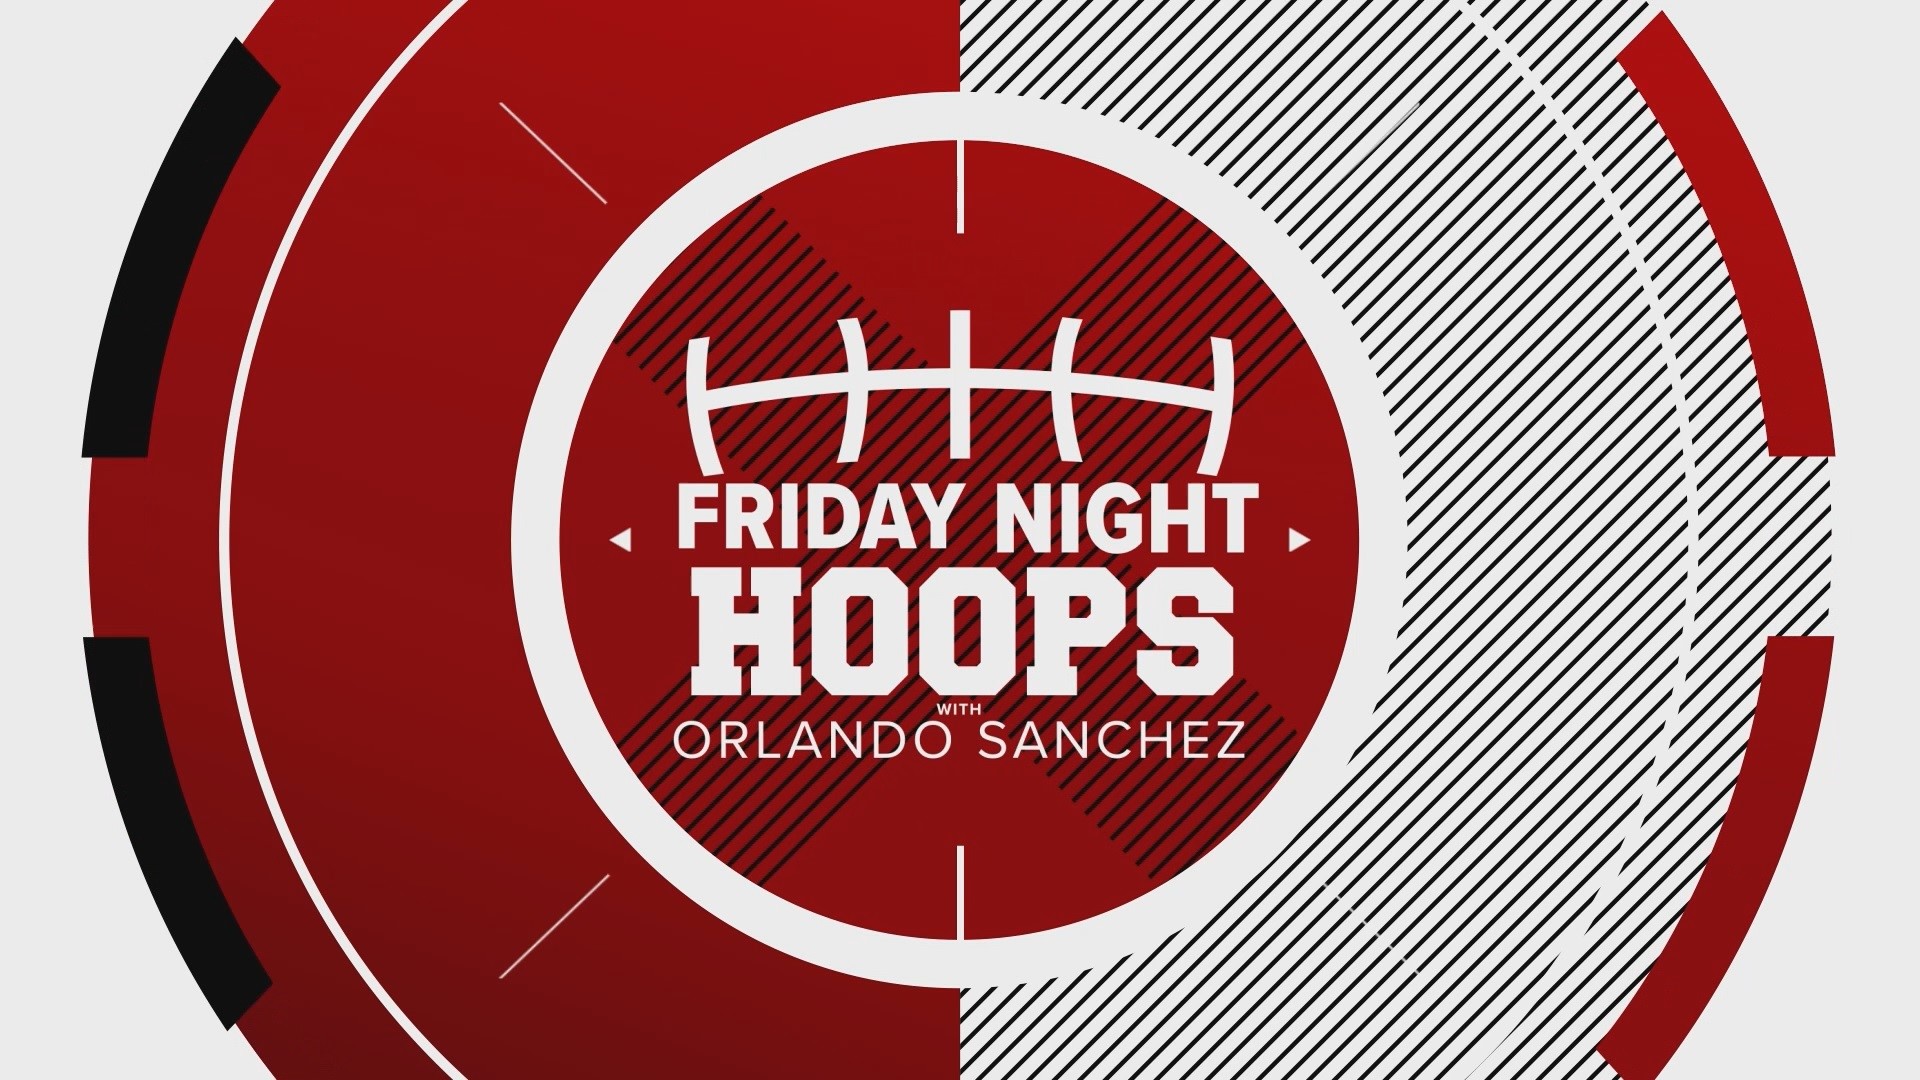 Friday Night Hoops with Orlando Sanchez and the KGW sports team, covering high school basketball in the Portland Metro Area and Southwest Washington.